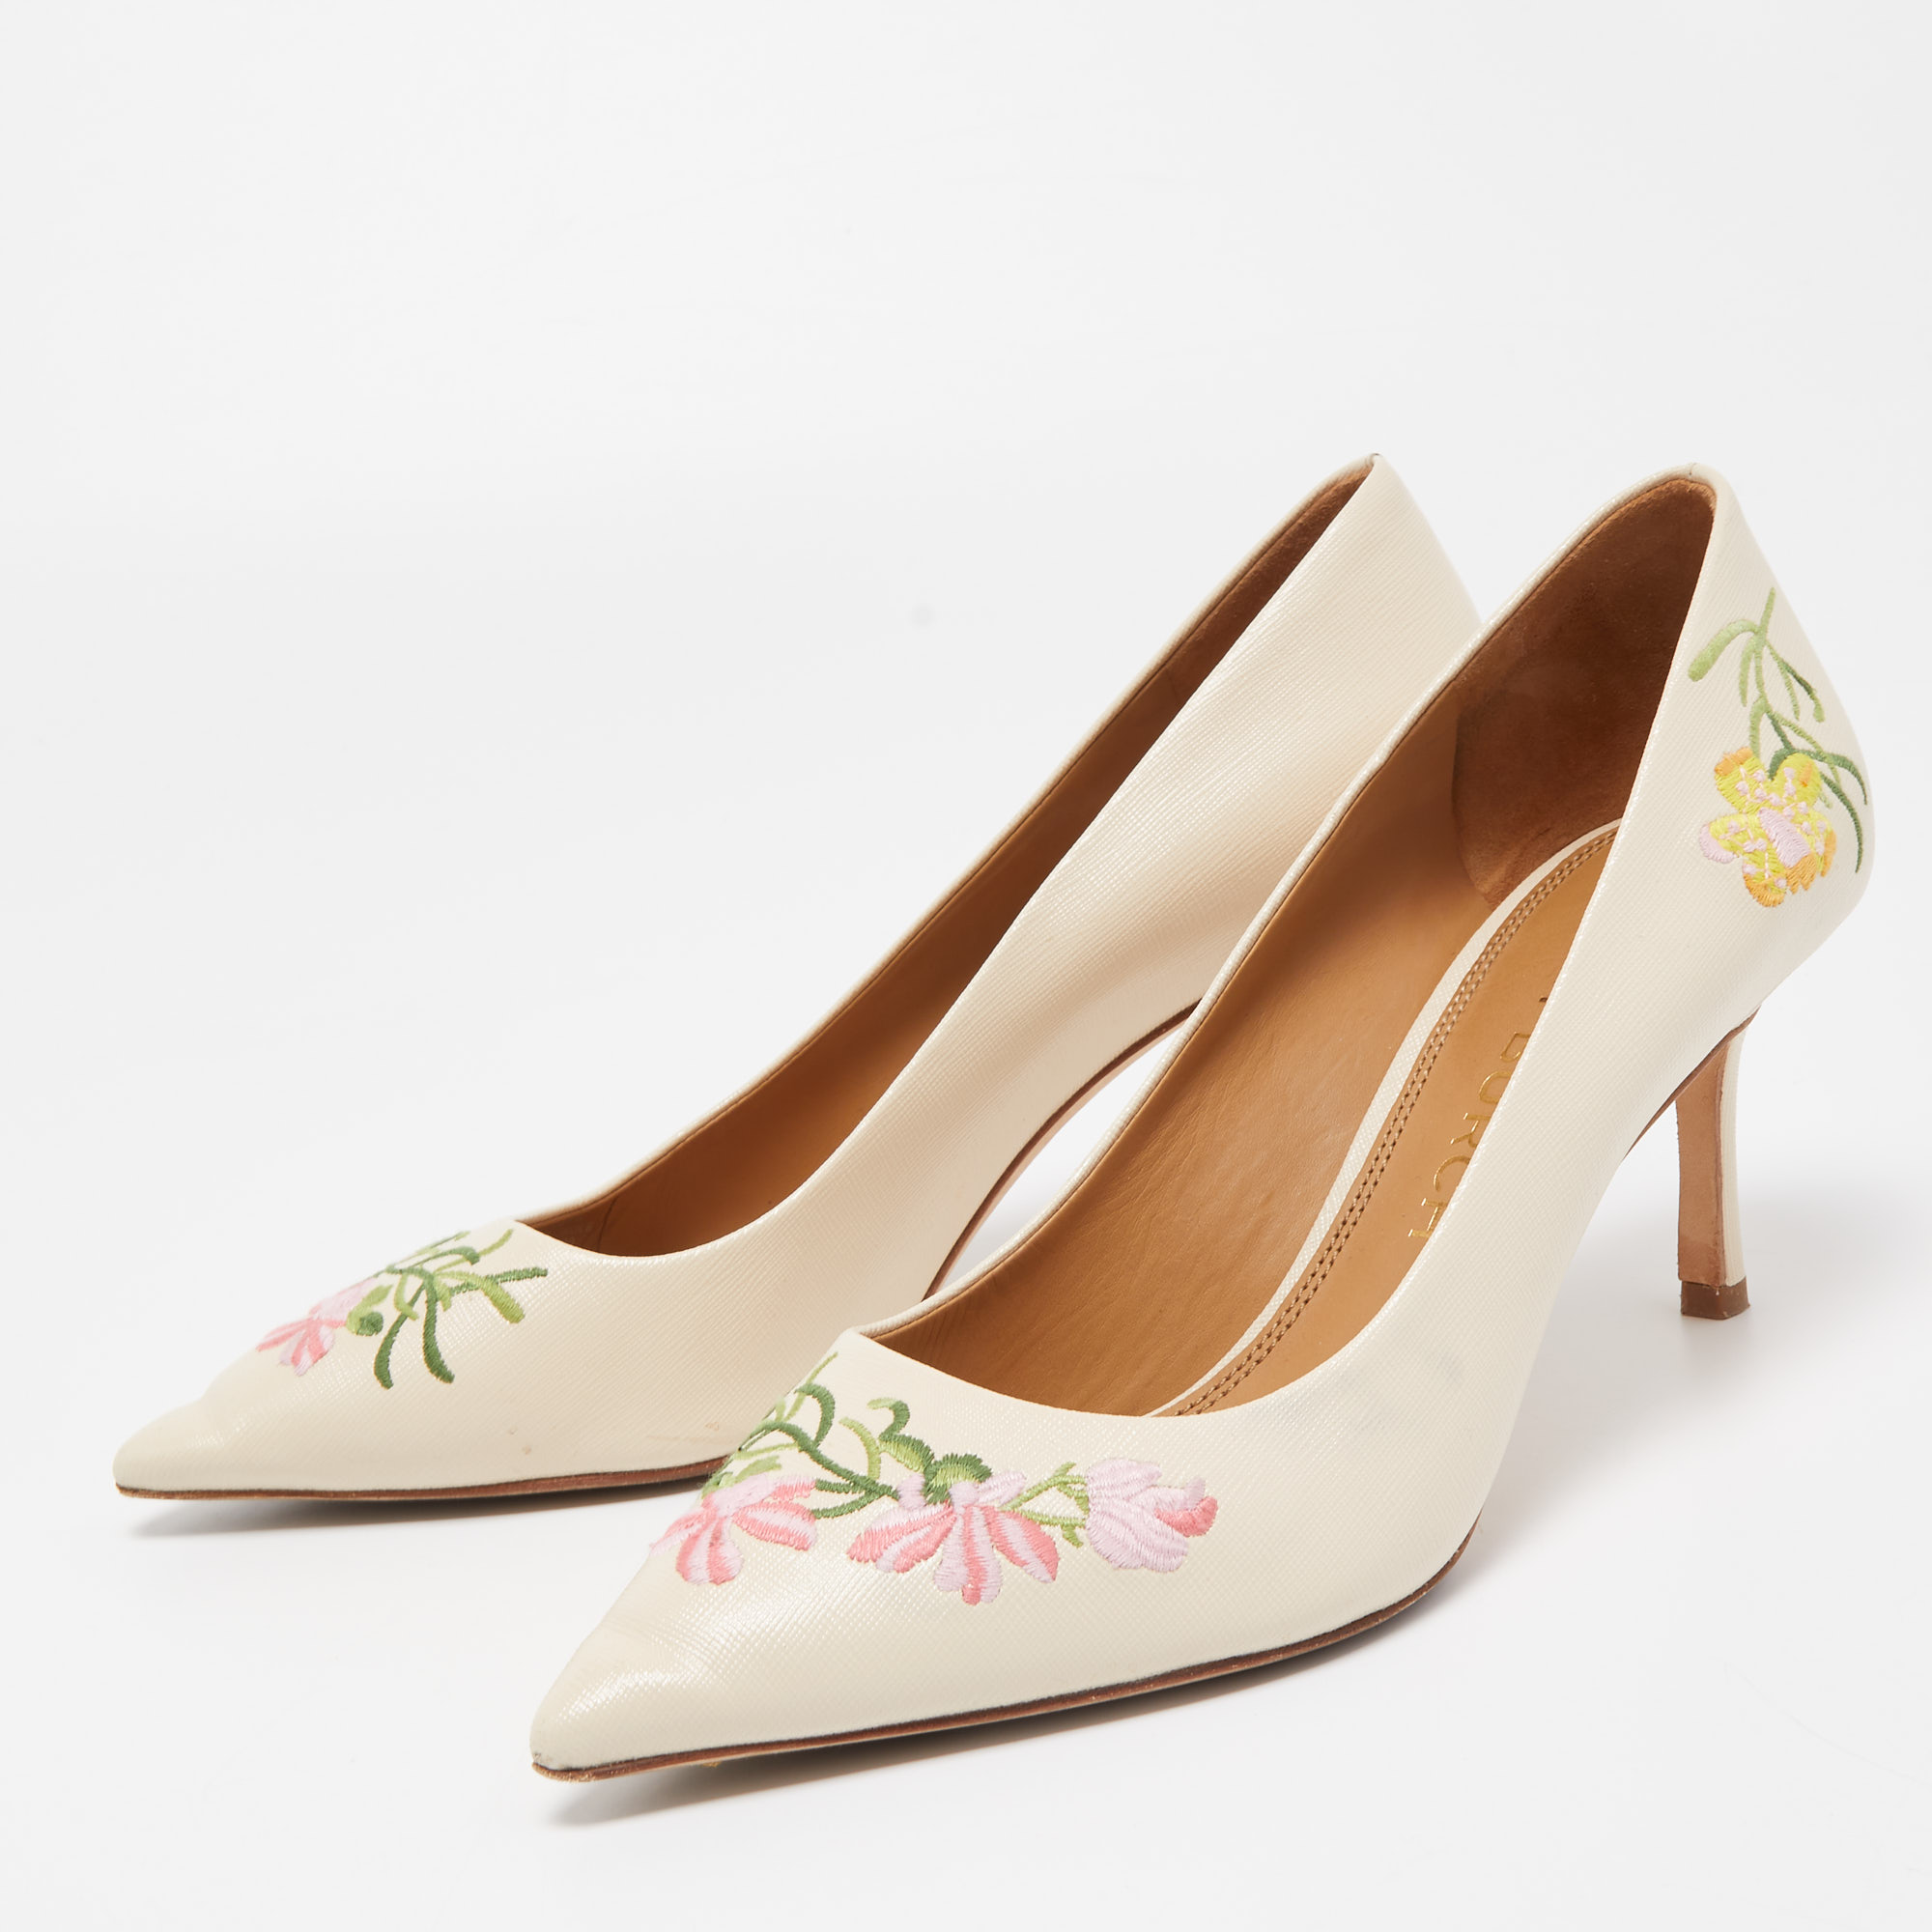 

Tory Burch Cream Patent Leather Flower Embroidered Elizabeth Pointed Toe Pumps Size